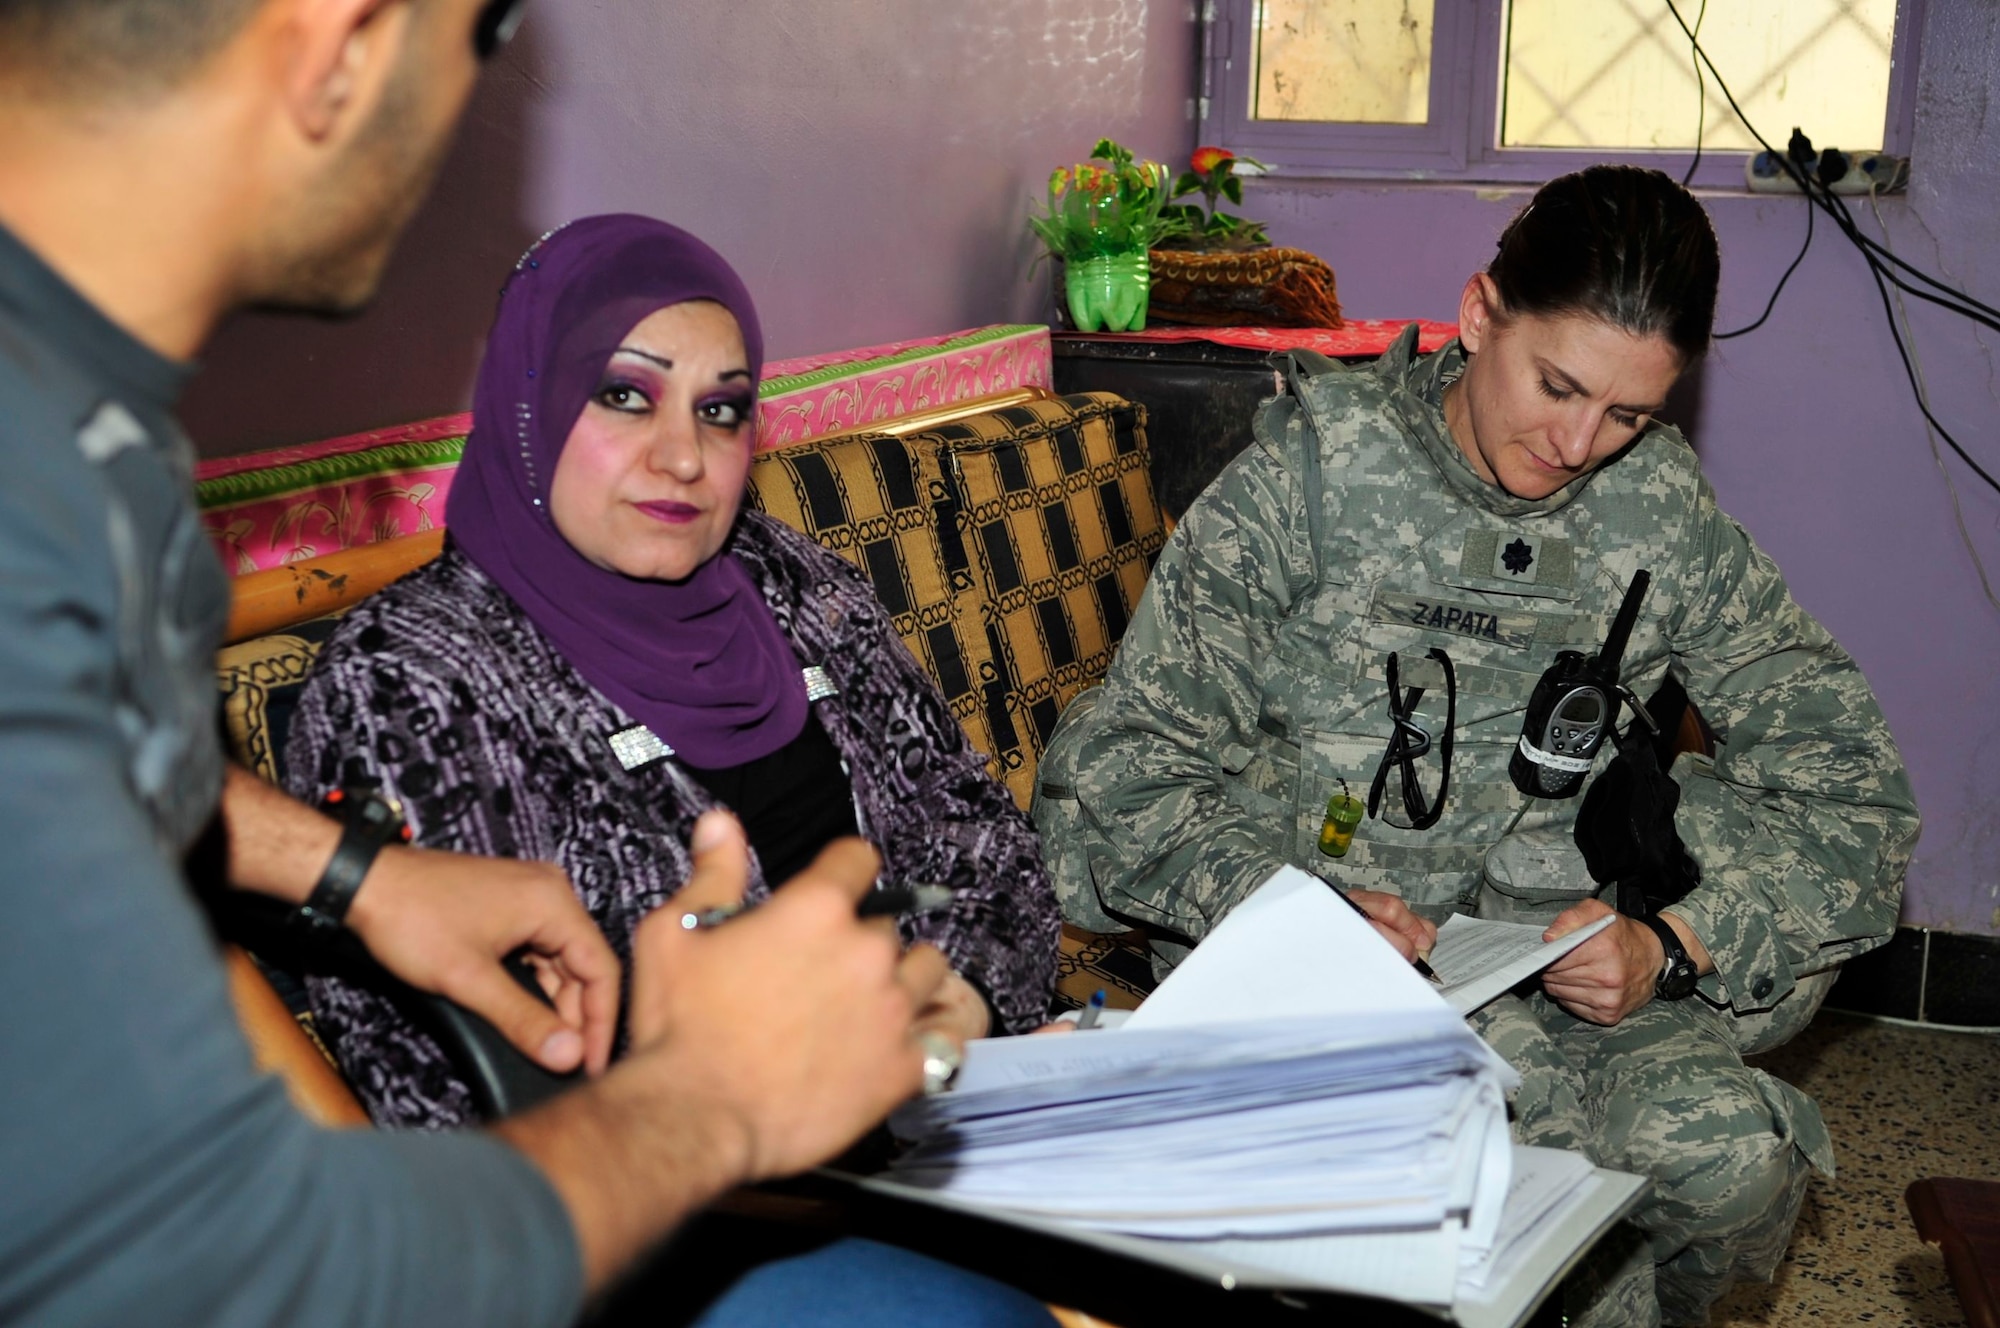 U.S. Air Force Lt. Col. Kaylin Haywood Zapata, Edmond, Okla., native and an Iraq Training and Advisory Mission – Police oil and electric police advisor, takes notes as she interviews the female warden at a women’s prison in Baghdad’s Rusafa District, Iraq, April 6, 2011. Colonel Haywood Zapata is asking her questions and identifying conditions at the facility as part of a U.S. Forces – Iraq provost marshal office corrections assistance transition team assessment. (U.S. Air Force photo by Senior Master Sgt. Larry A. Schneck/Released)